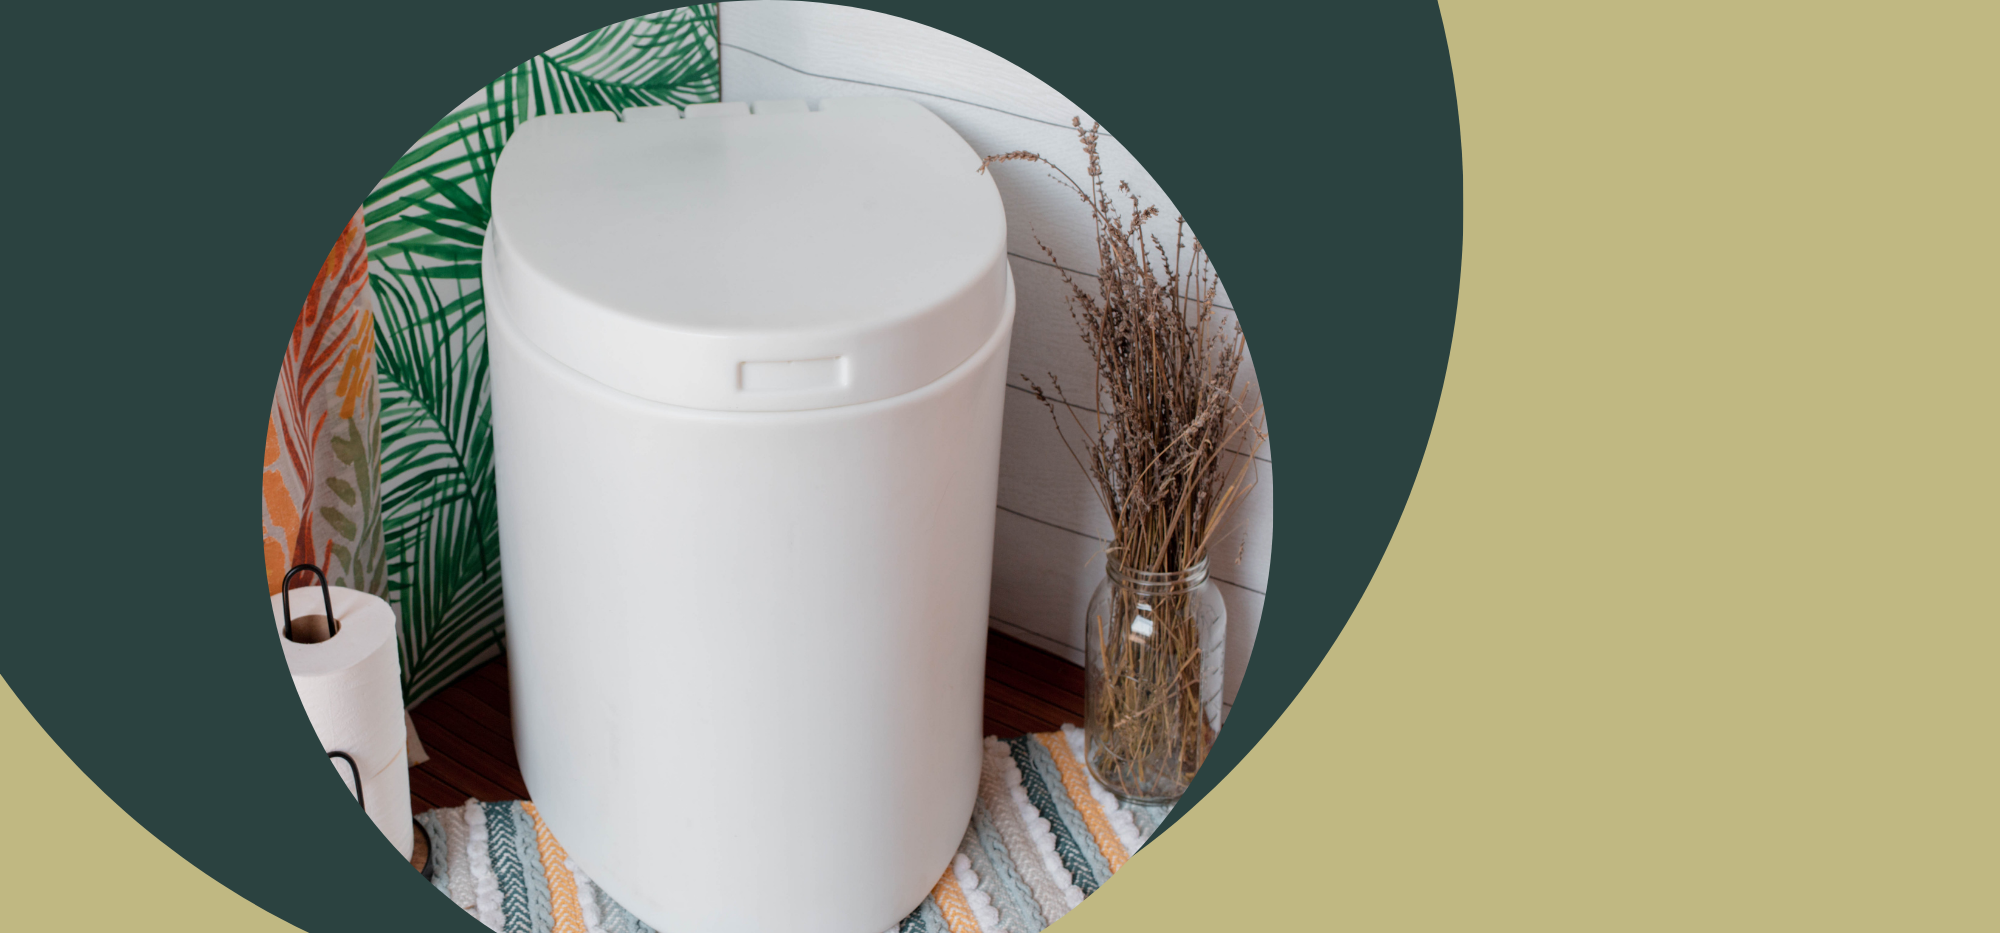 The 5 Features to Look for in a Composting Toilet